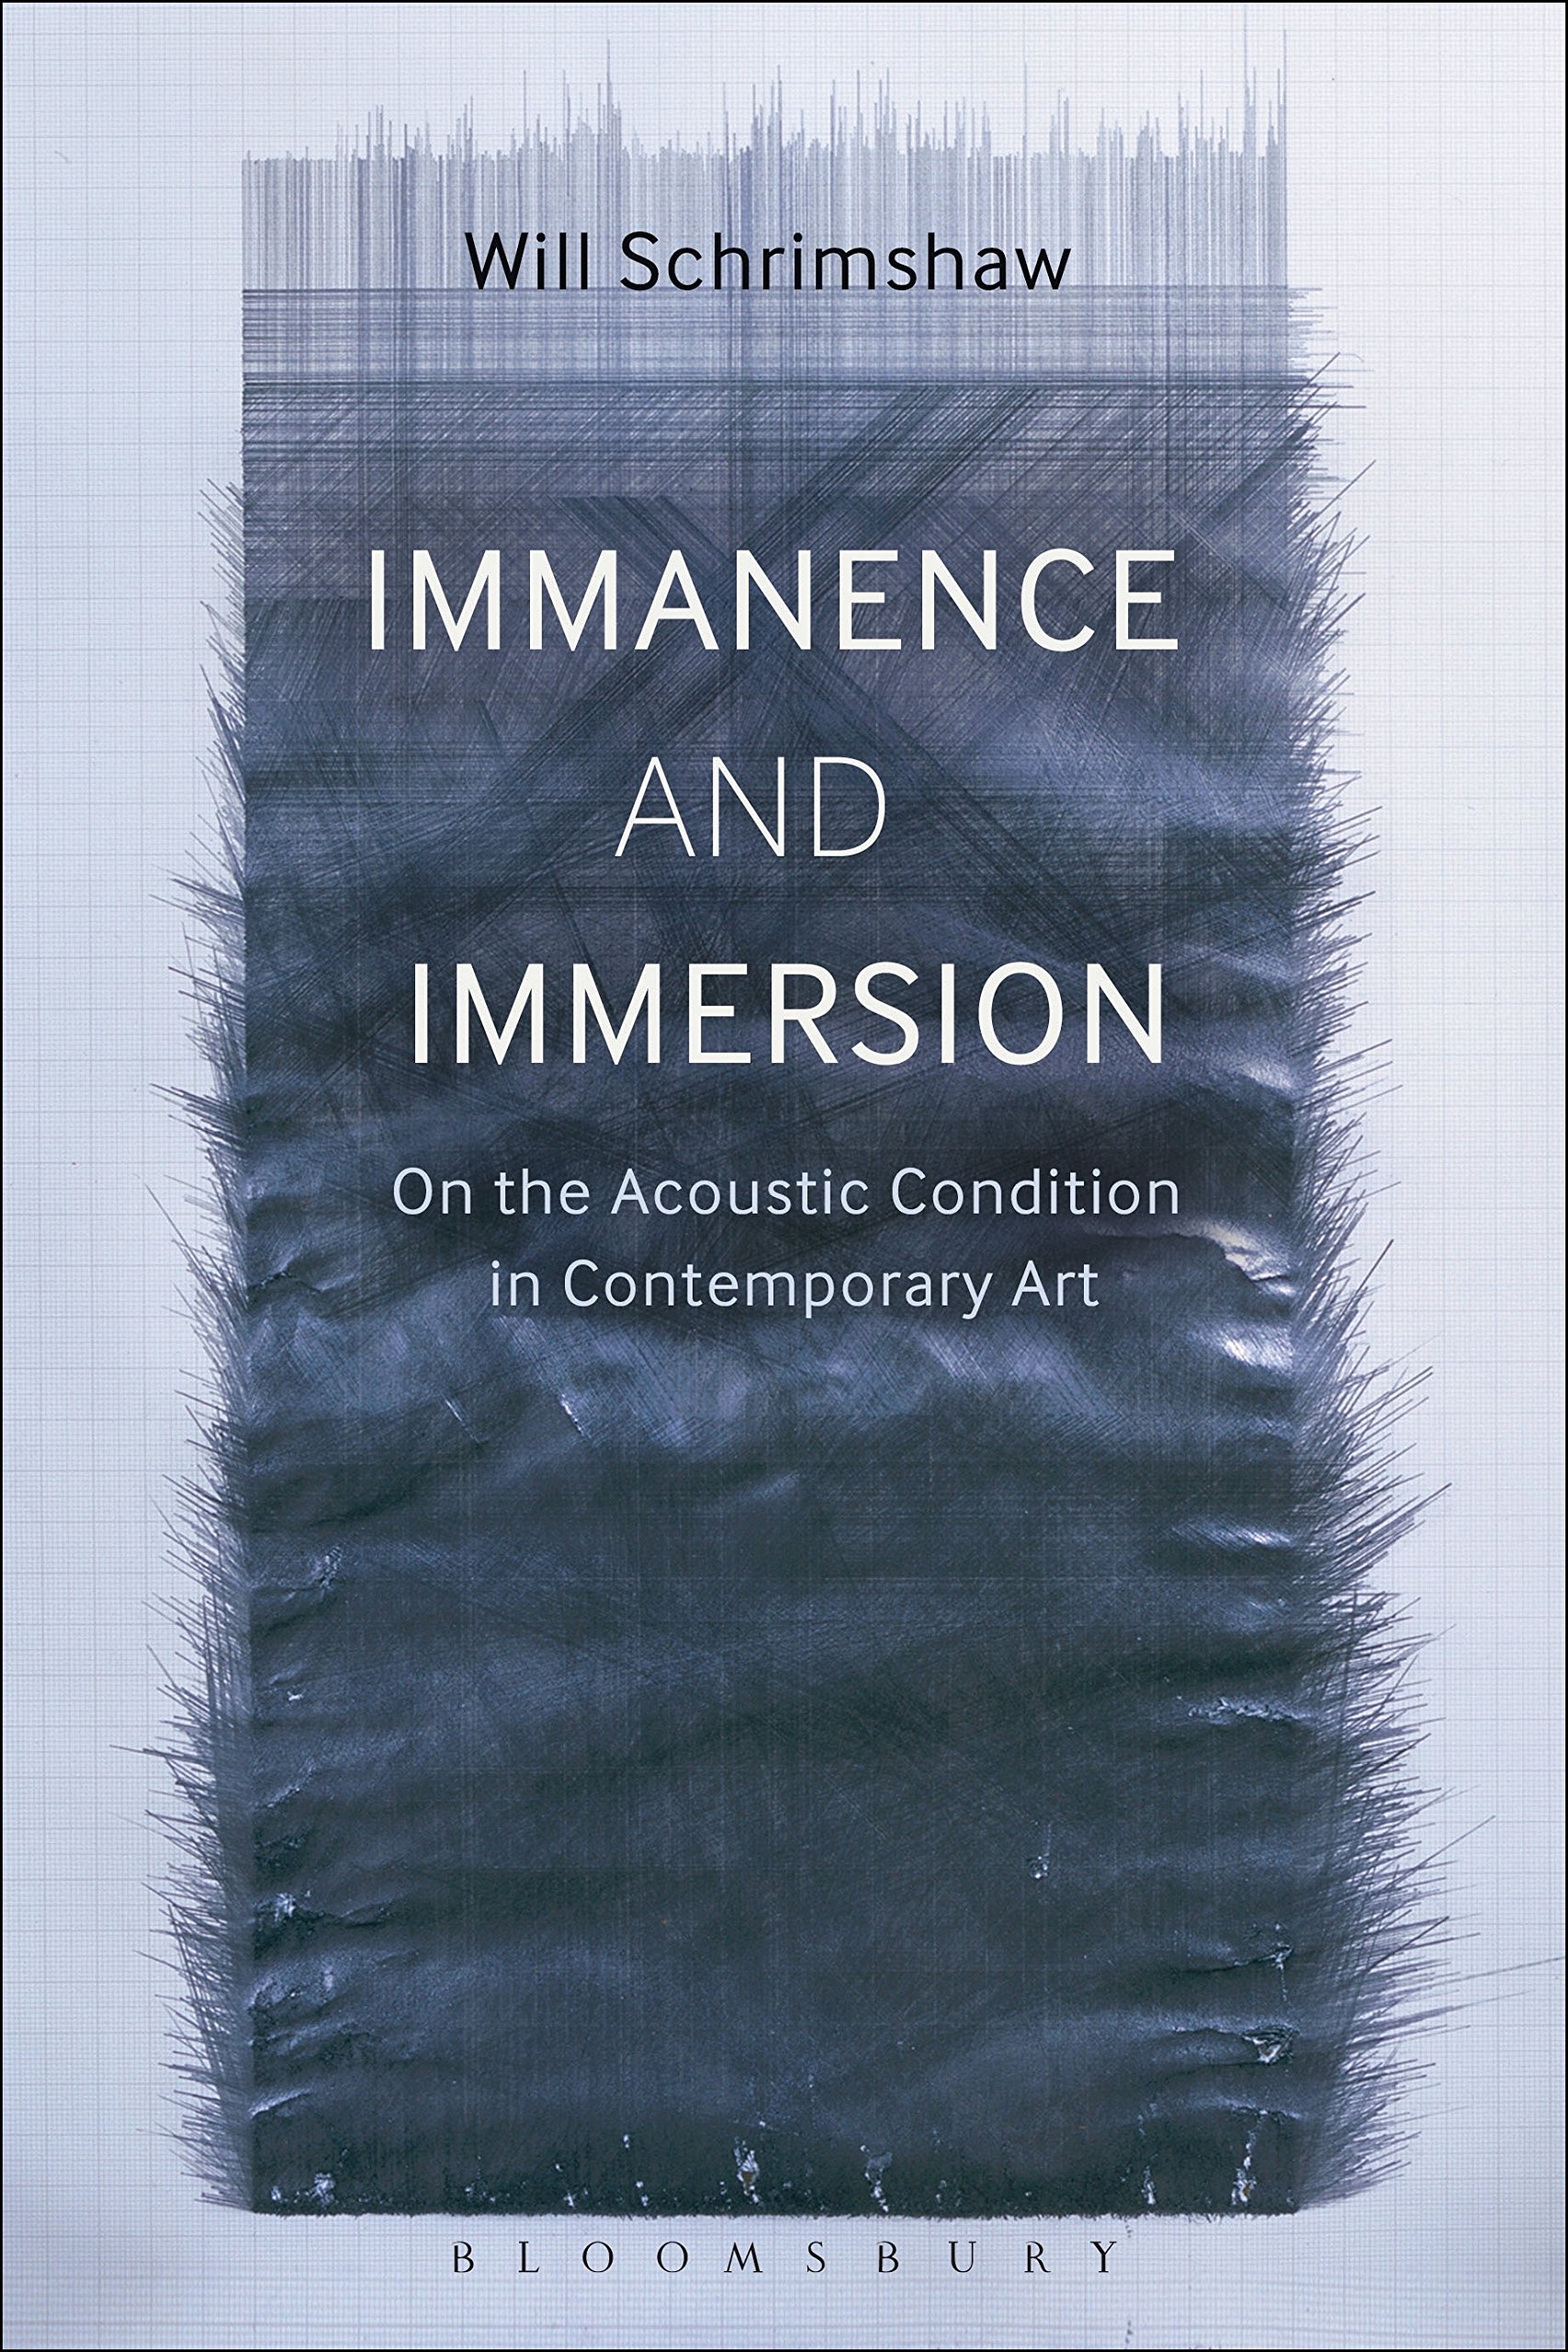 Immanence and Immersion